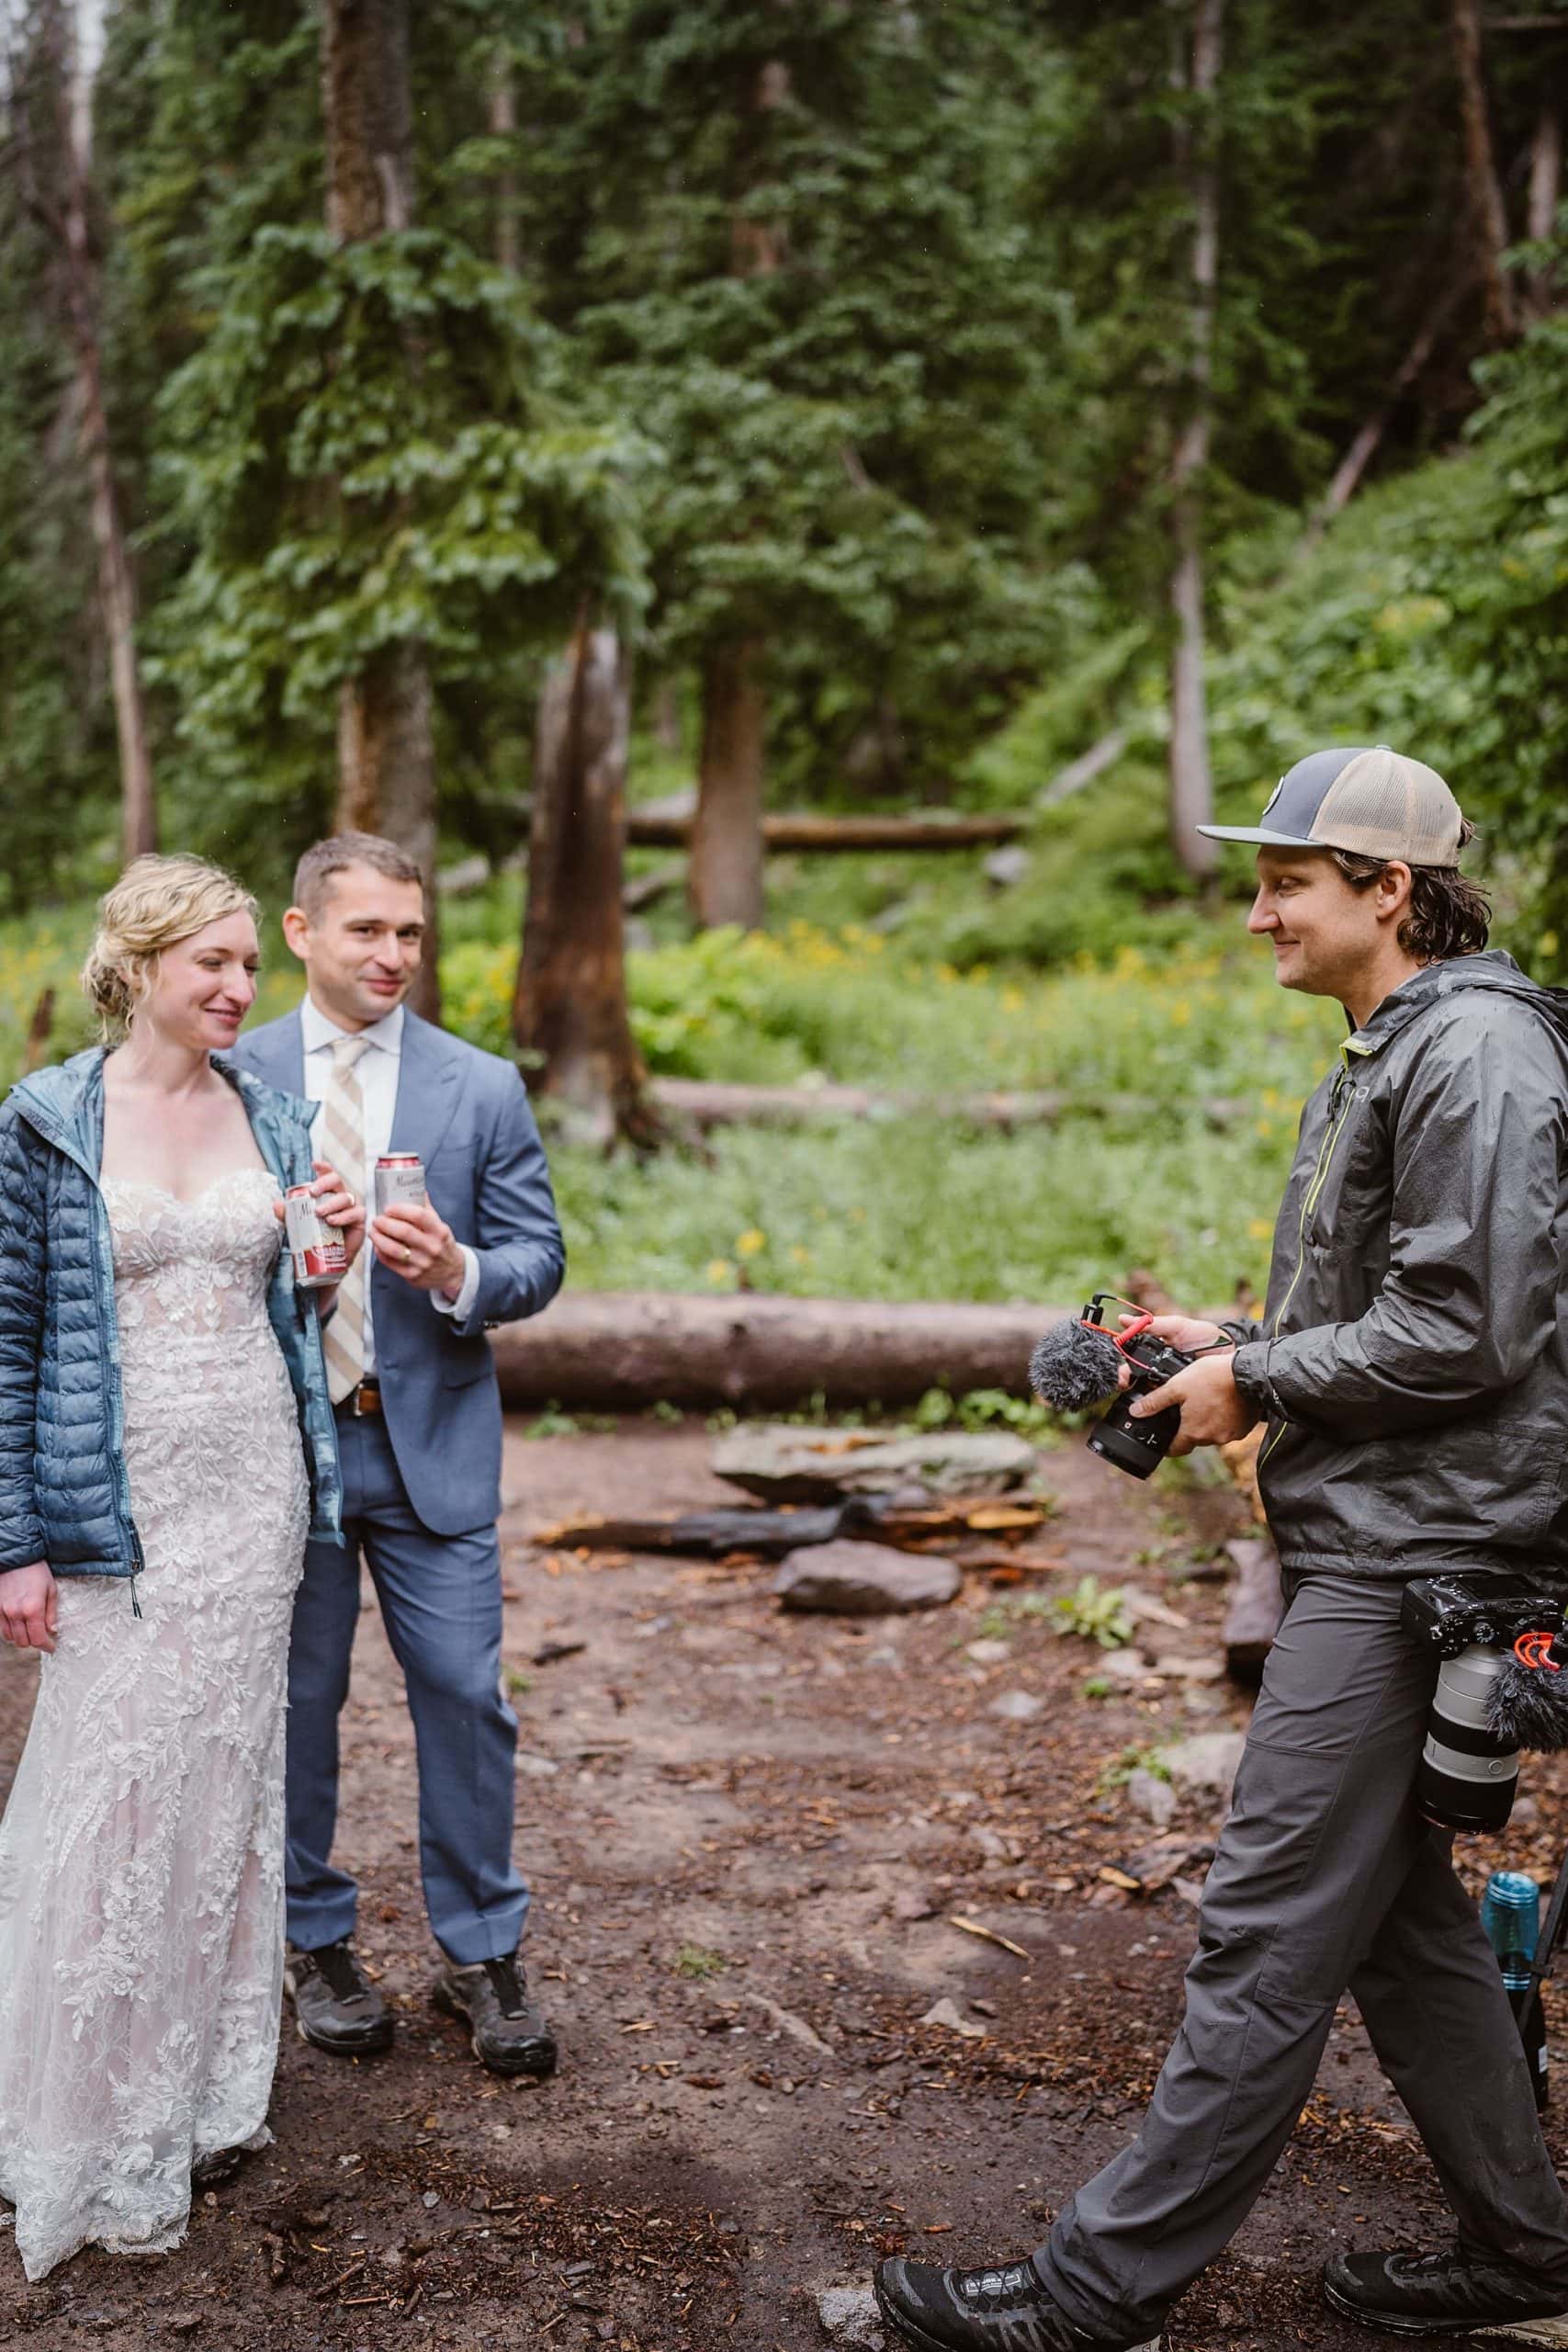 An elopement videographer is seen with a bride and groom at an adventure elopement ceremony